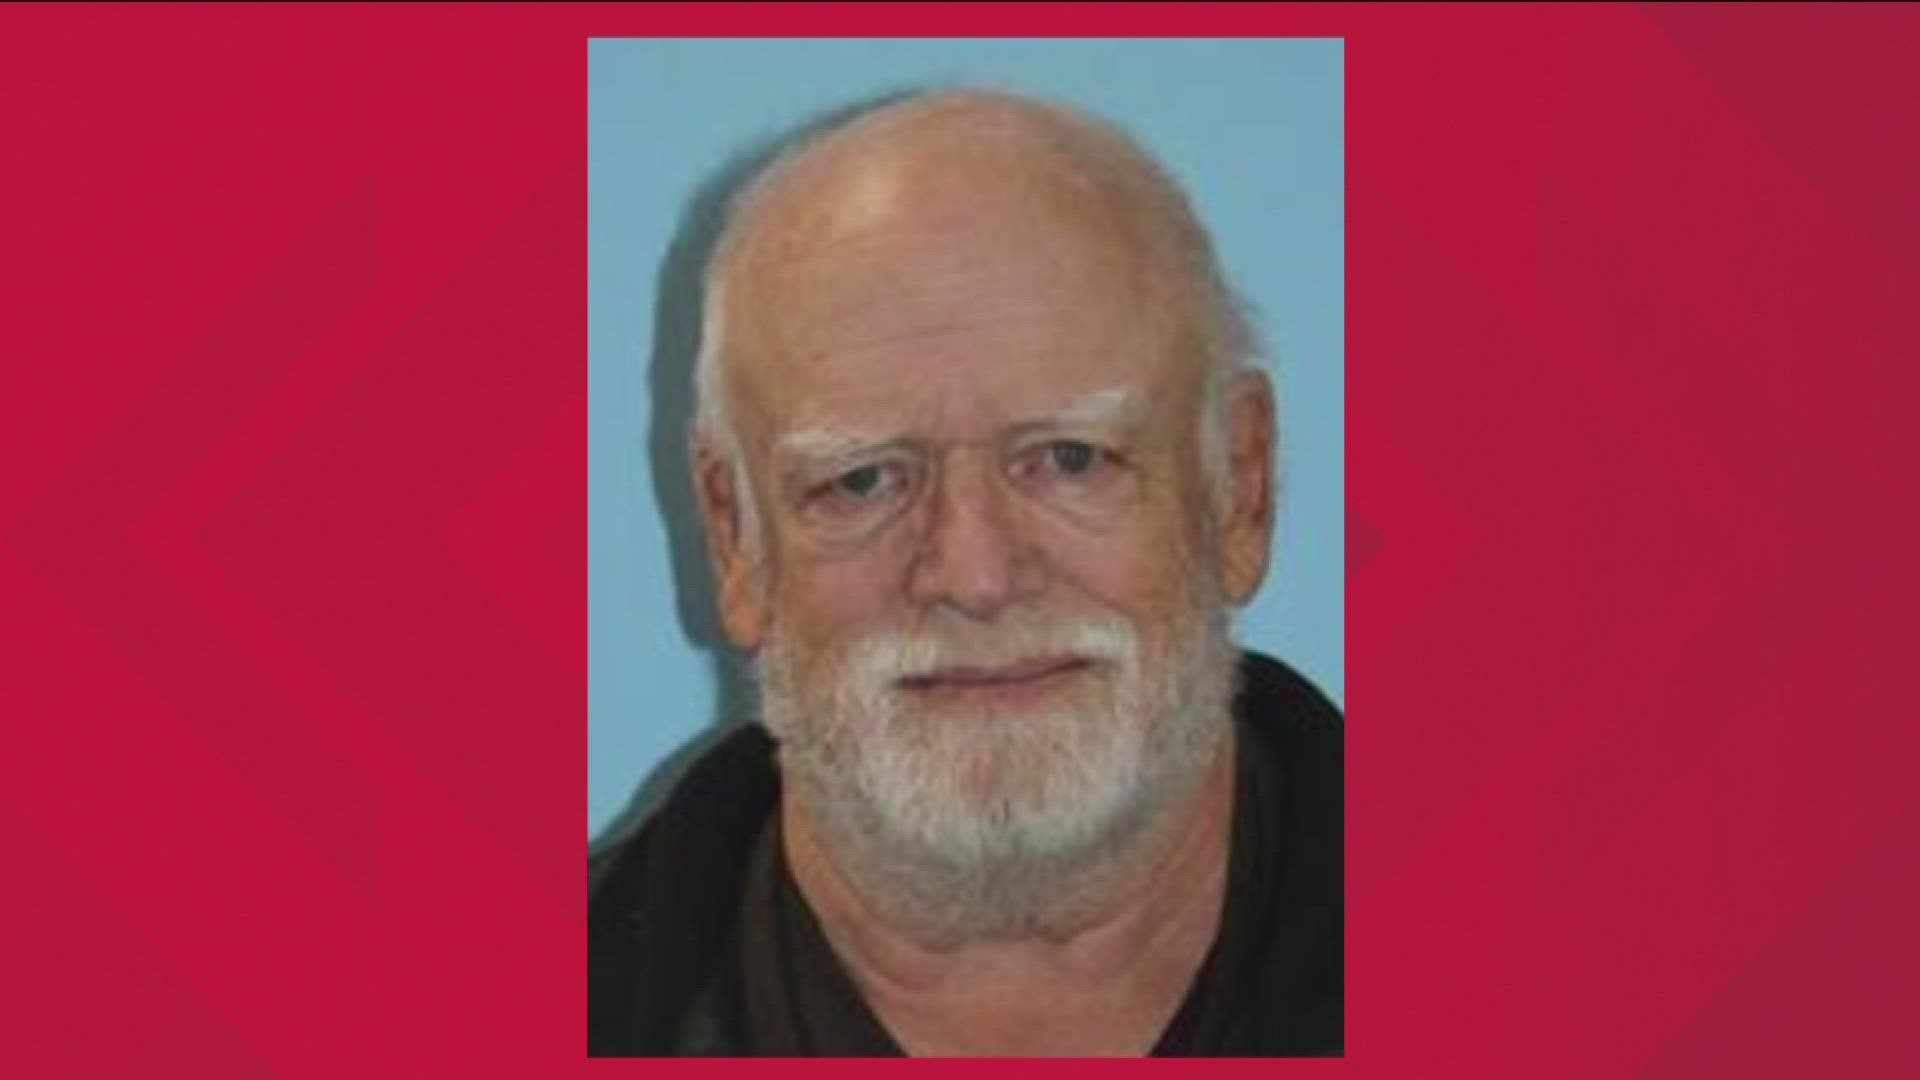 Idaho State Police on Wednesday announced the 77-year-old Meridian man has been located "alive and safe." He was found on a remote road in Boise County.